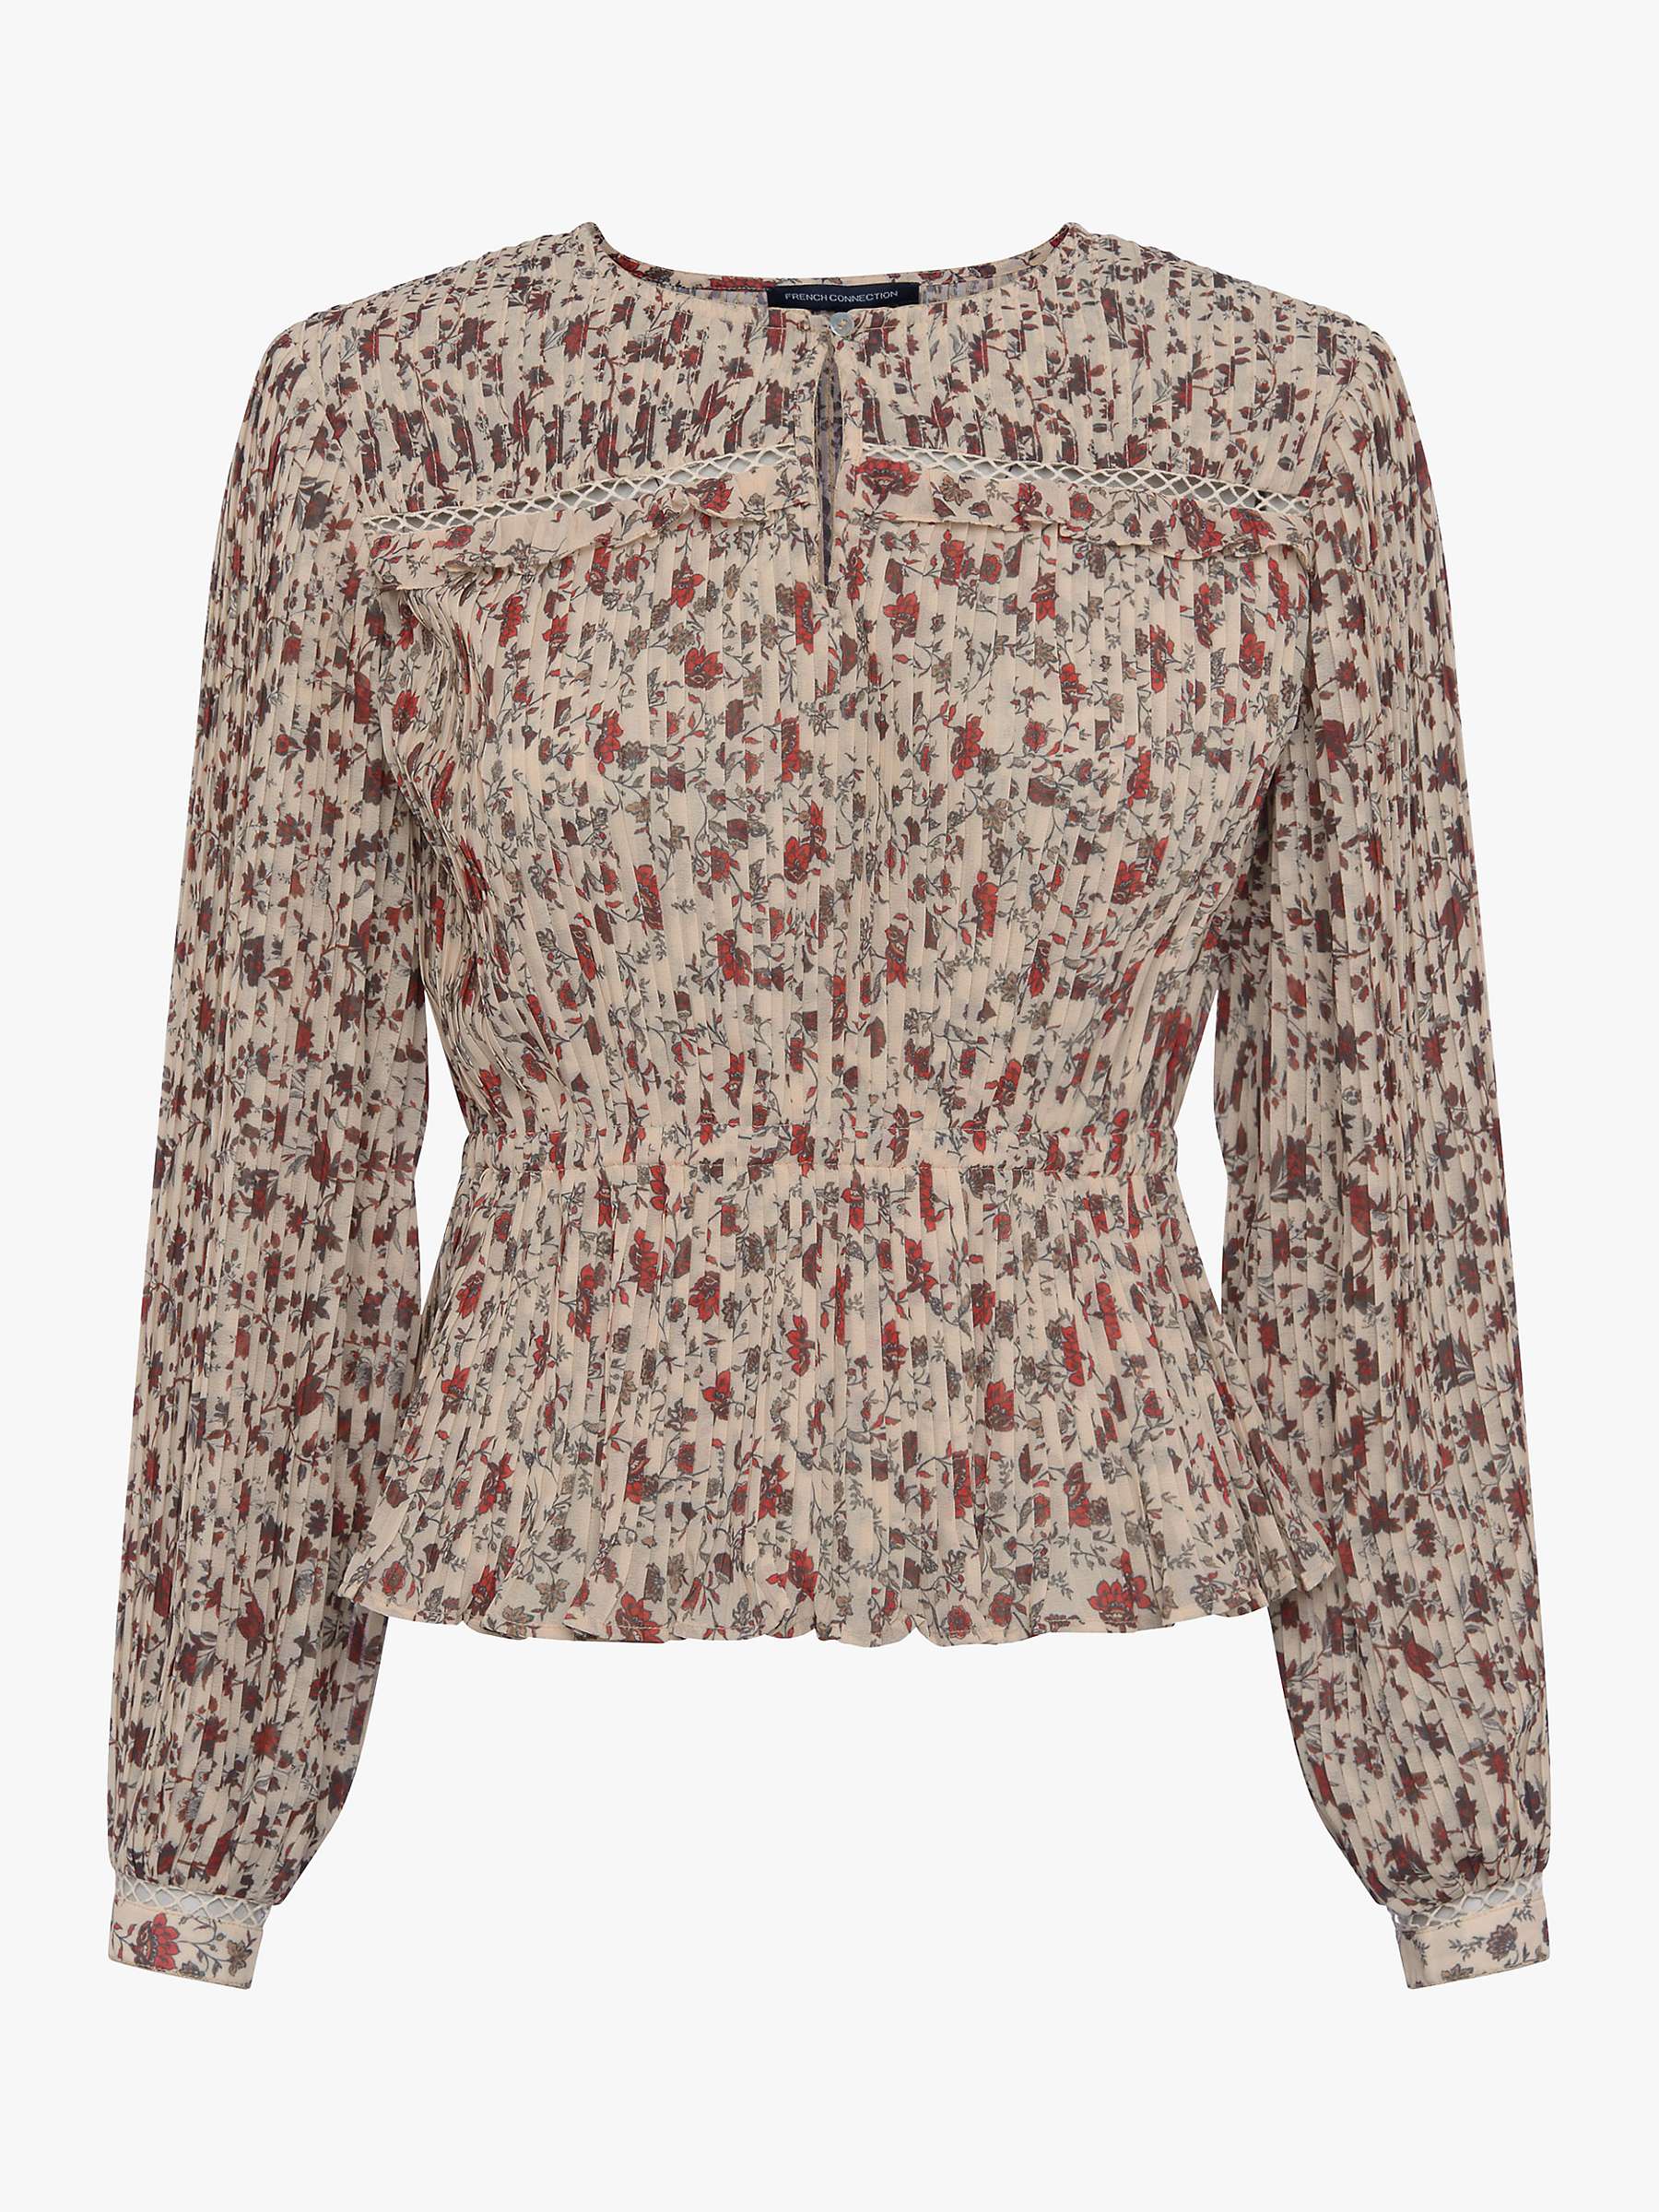 Buy French Connection Alison Floral Top, Cream/Multi Online at johnlewis.com